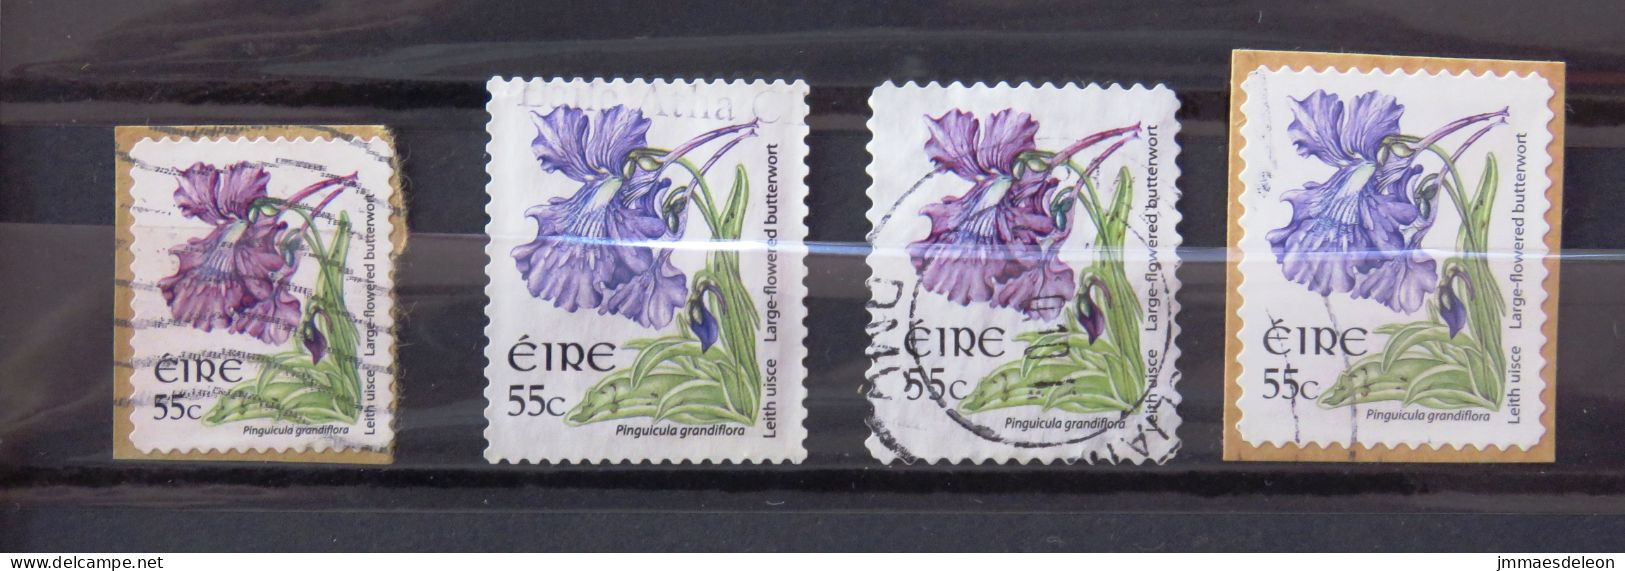 Ireland 2007 Flowers - 3 Different, 1 Smeller Sie, 2 Different Perforations, One Different Color - Used Stamps